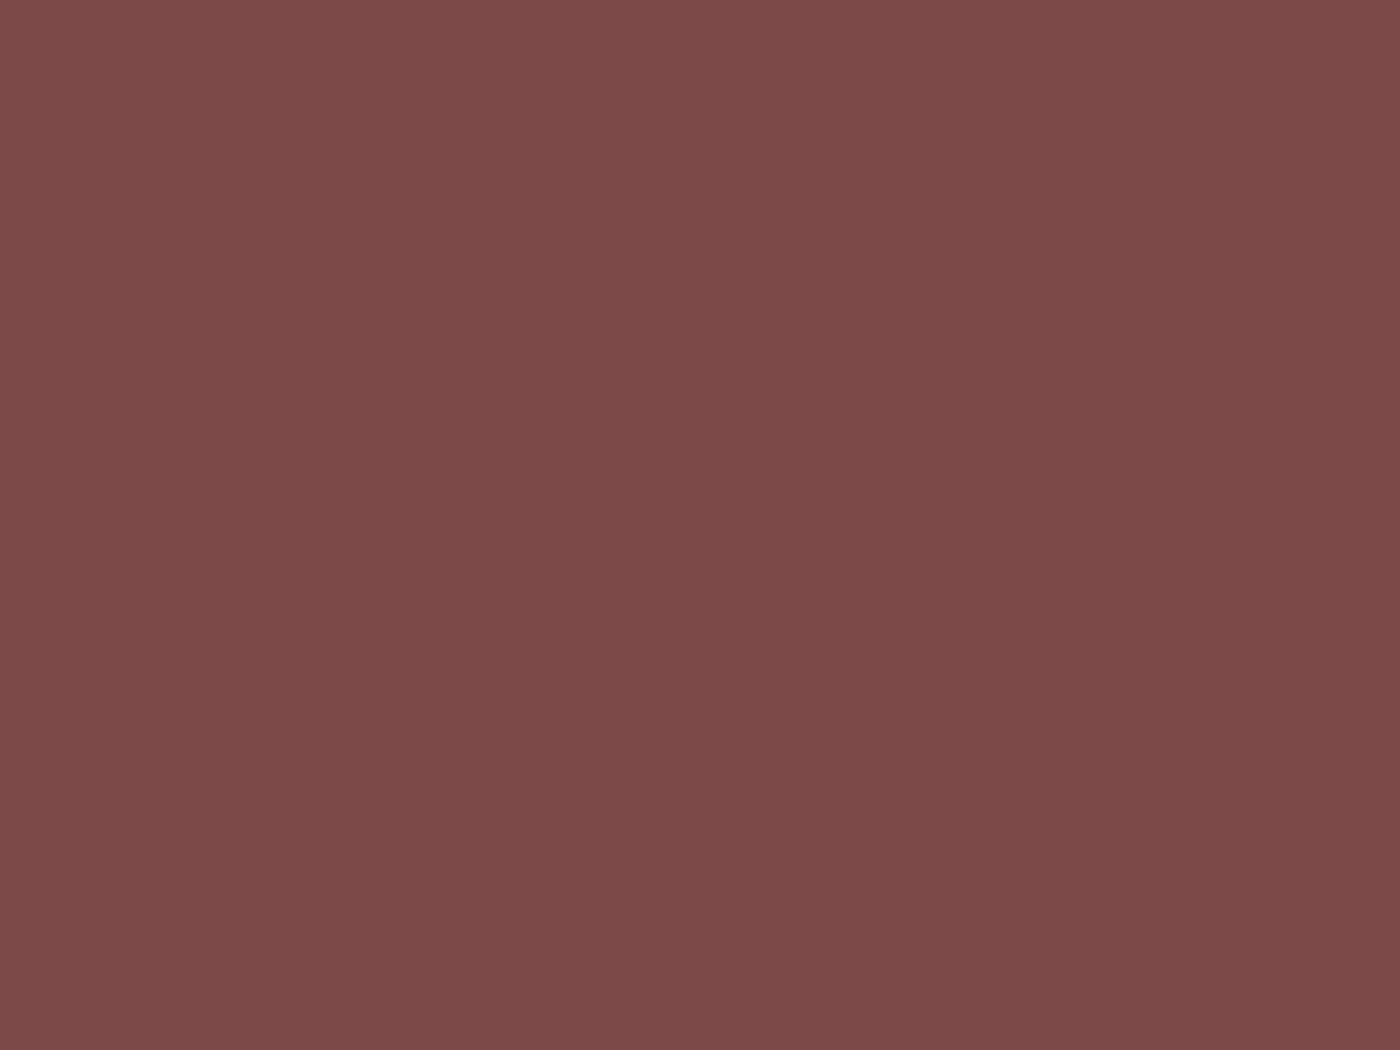 1400x1050 Tuscan Red Solid Color Background